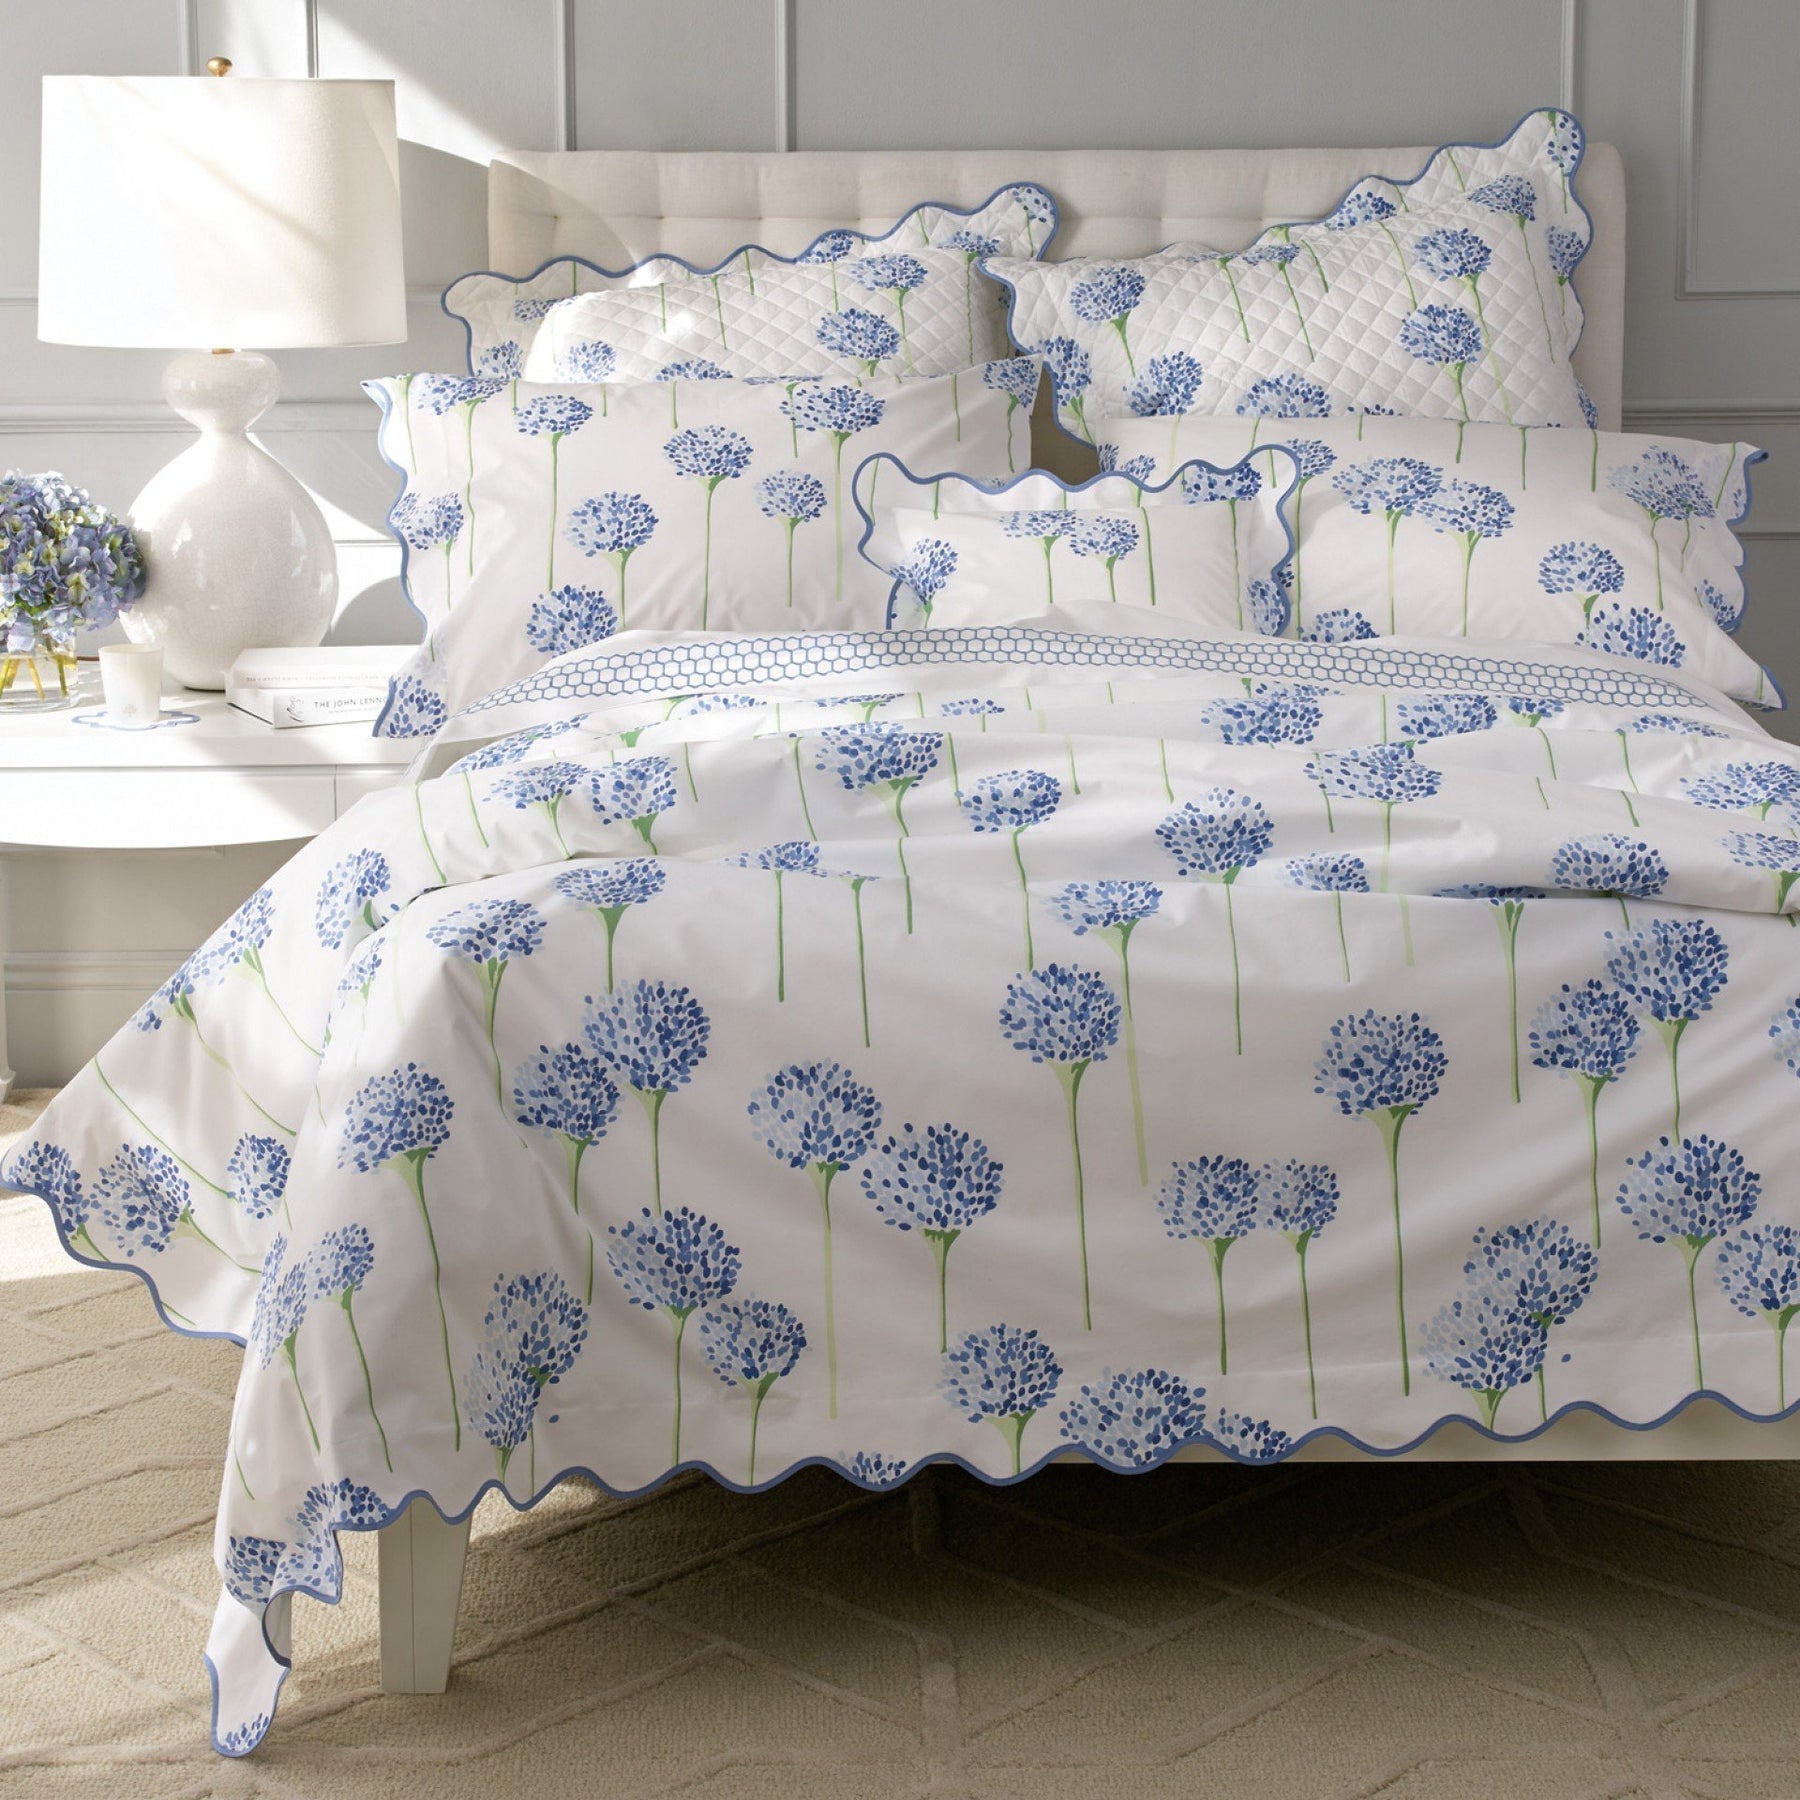 Charlotte Bed Linens - Pioneer Linens